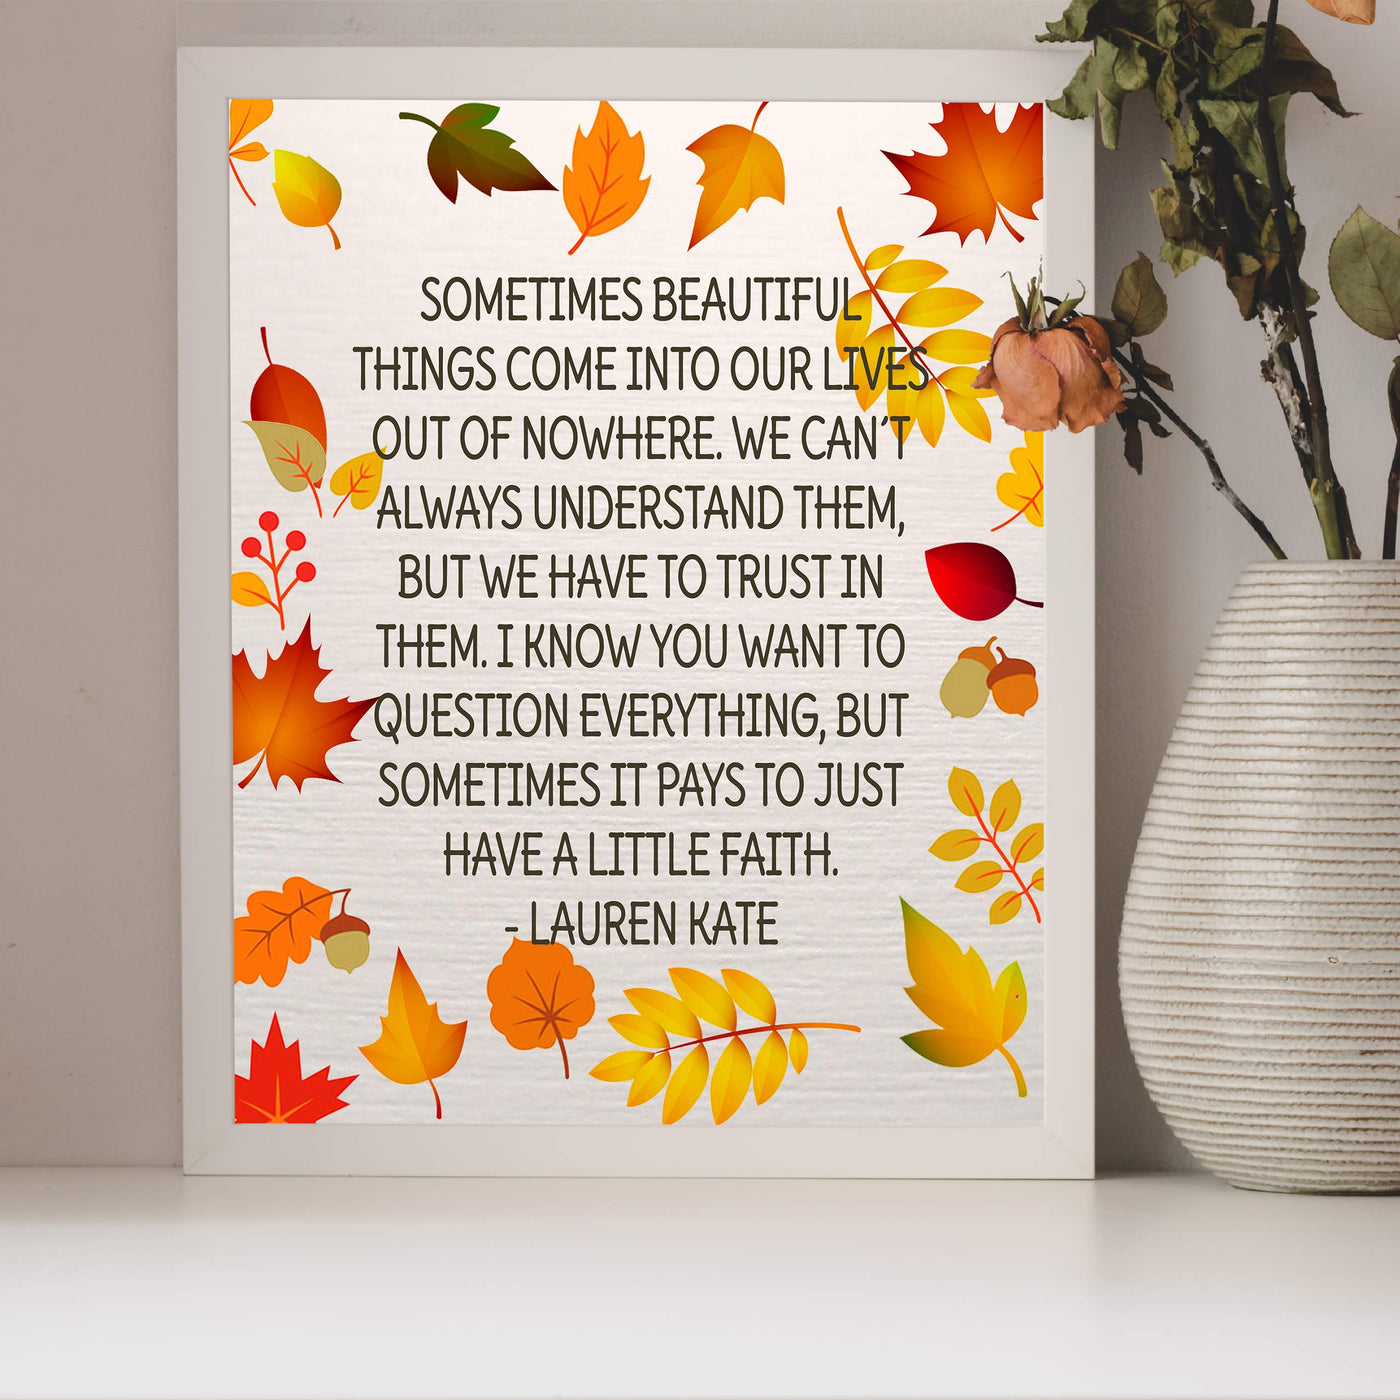 Lauren Kate Quotes-"Sometimes It Pays to Have a Little Faith" Motivational Quotes Wall Art -8 x 10" Typographic Print w/Fall Leaves-Ready to Frame. Inspirational Decor for Home-Office-Studio-School!